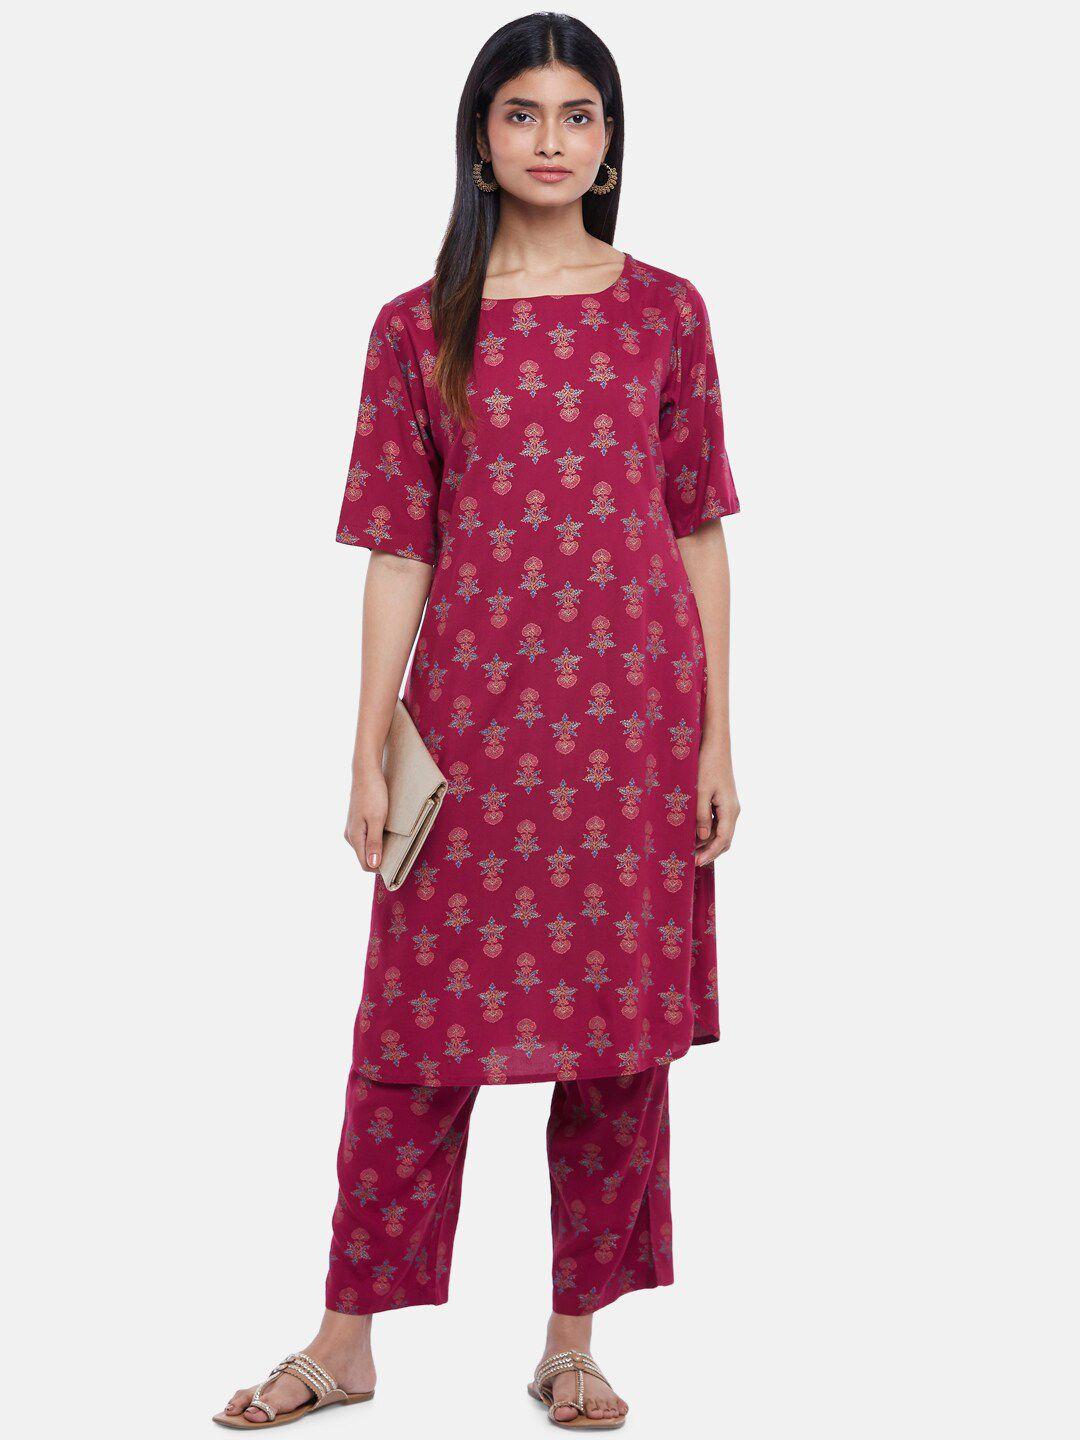 rangmanch by pantaloons women red floral printed kurta with trousers